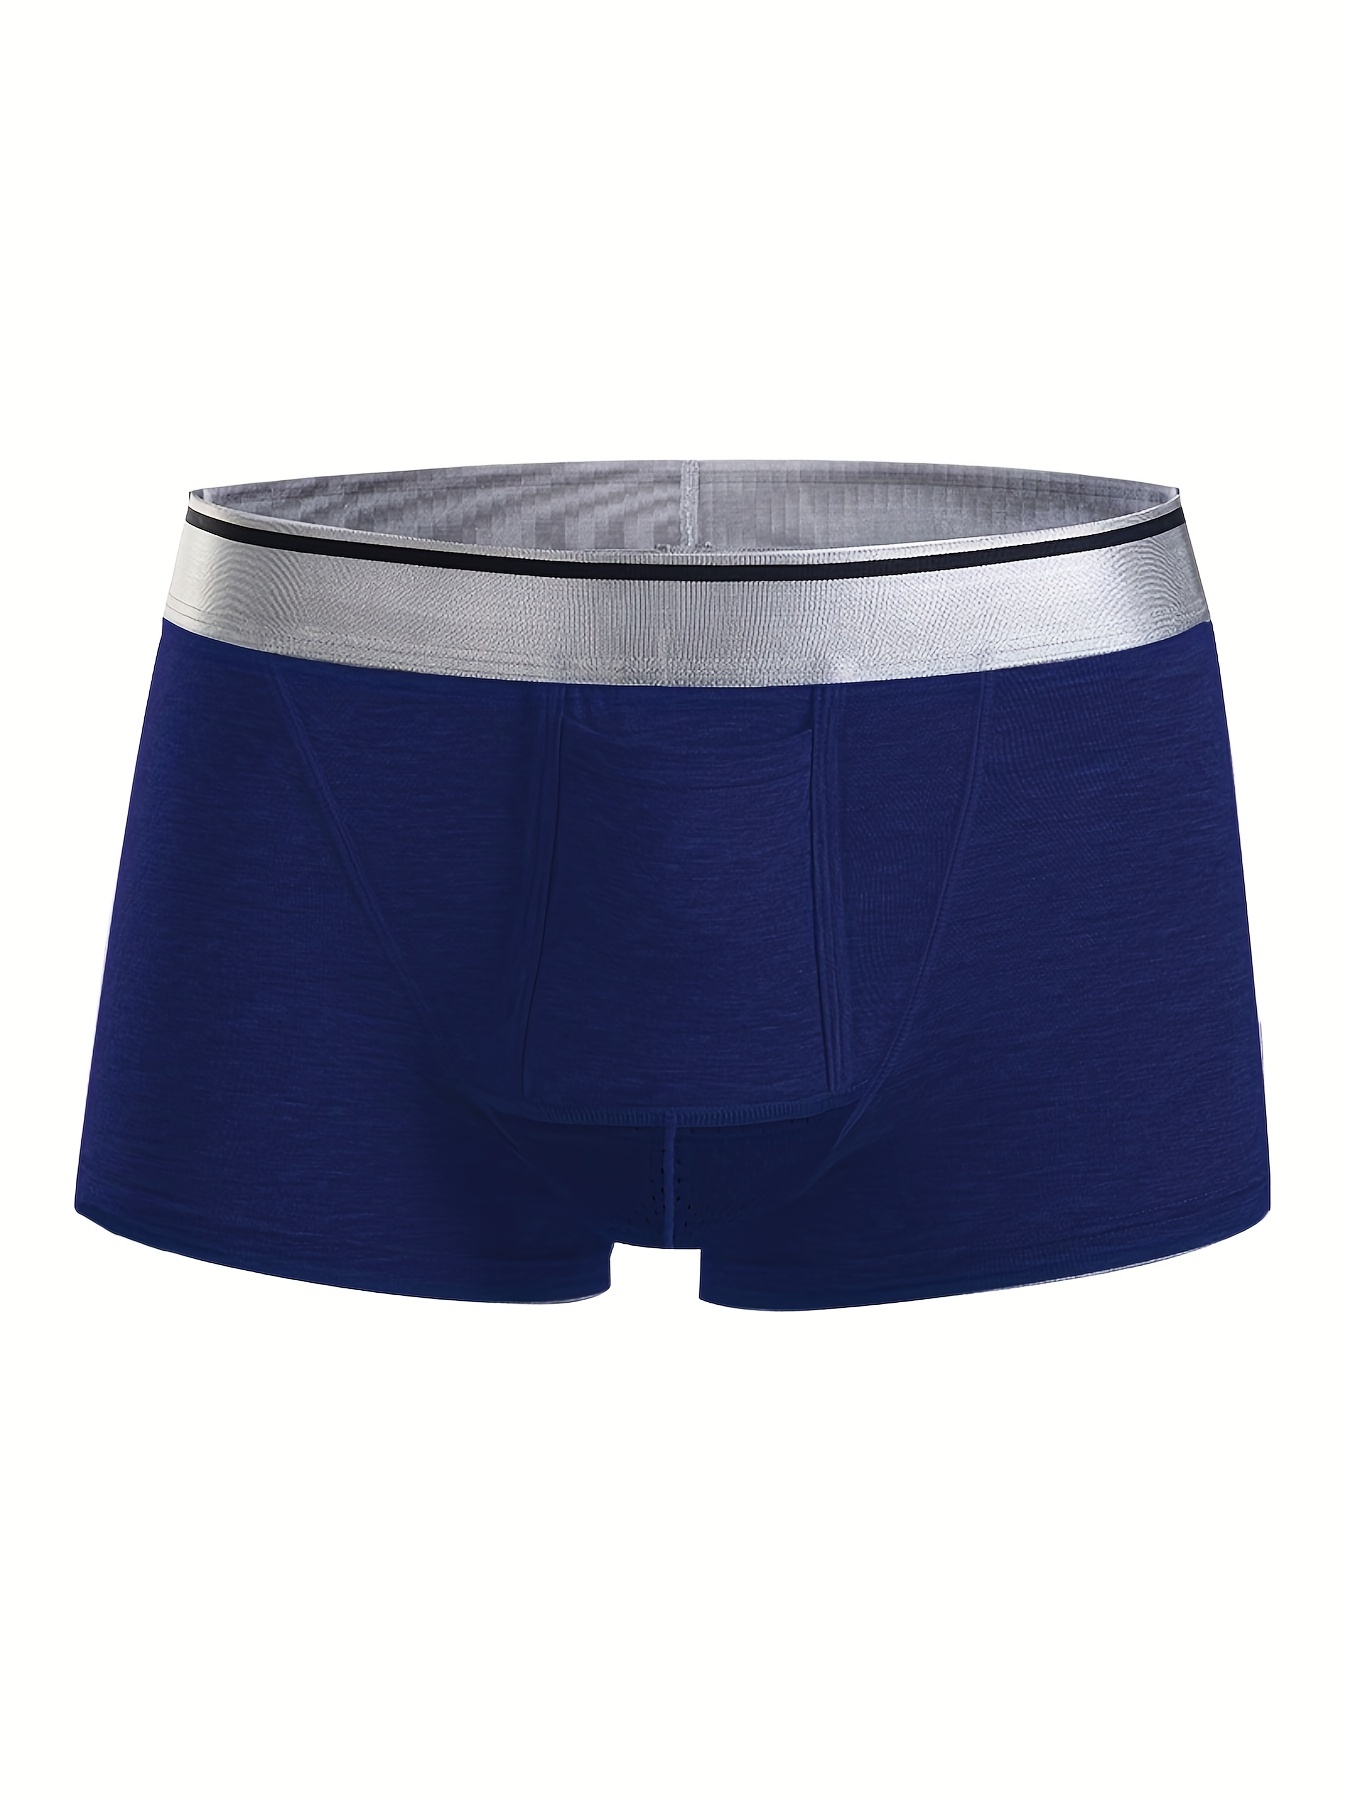 Mens Sexy Low-rise Modal Boxer Briefs Pouch Underwear Shorts Trunks  Underpants